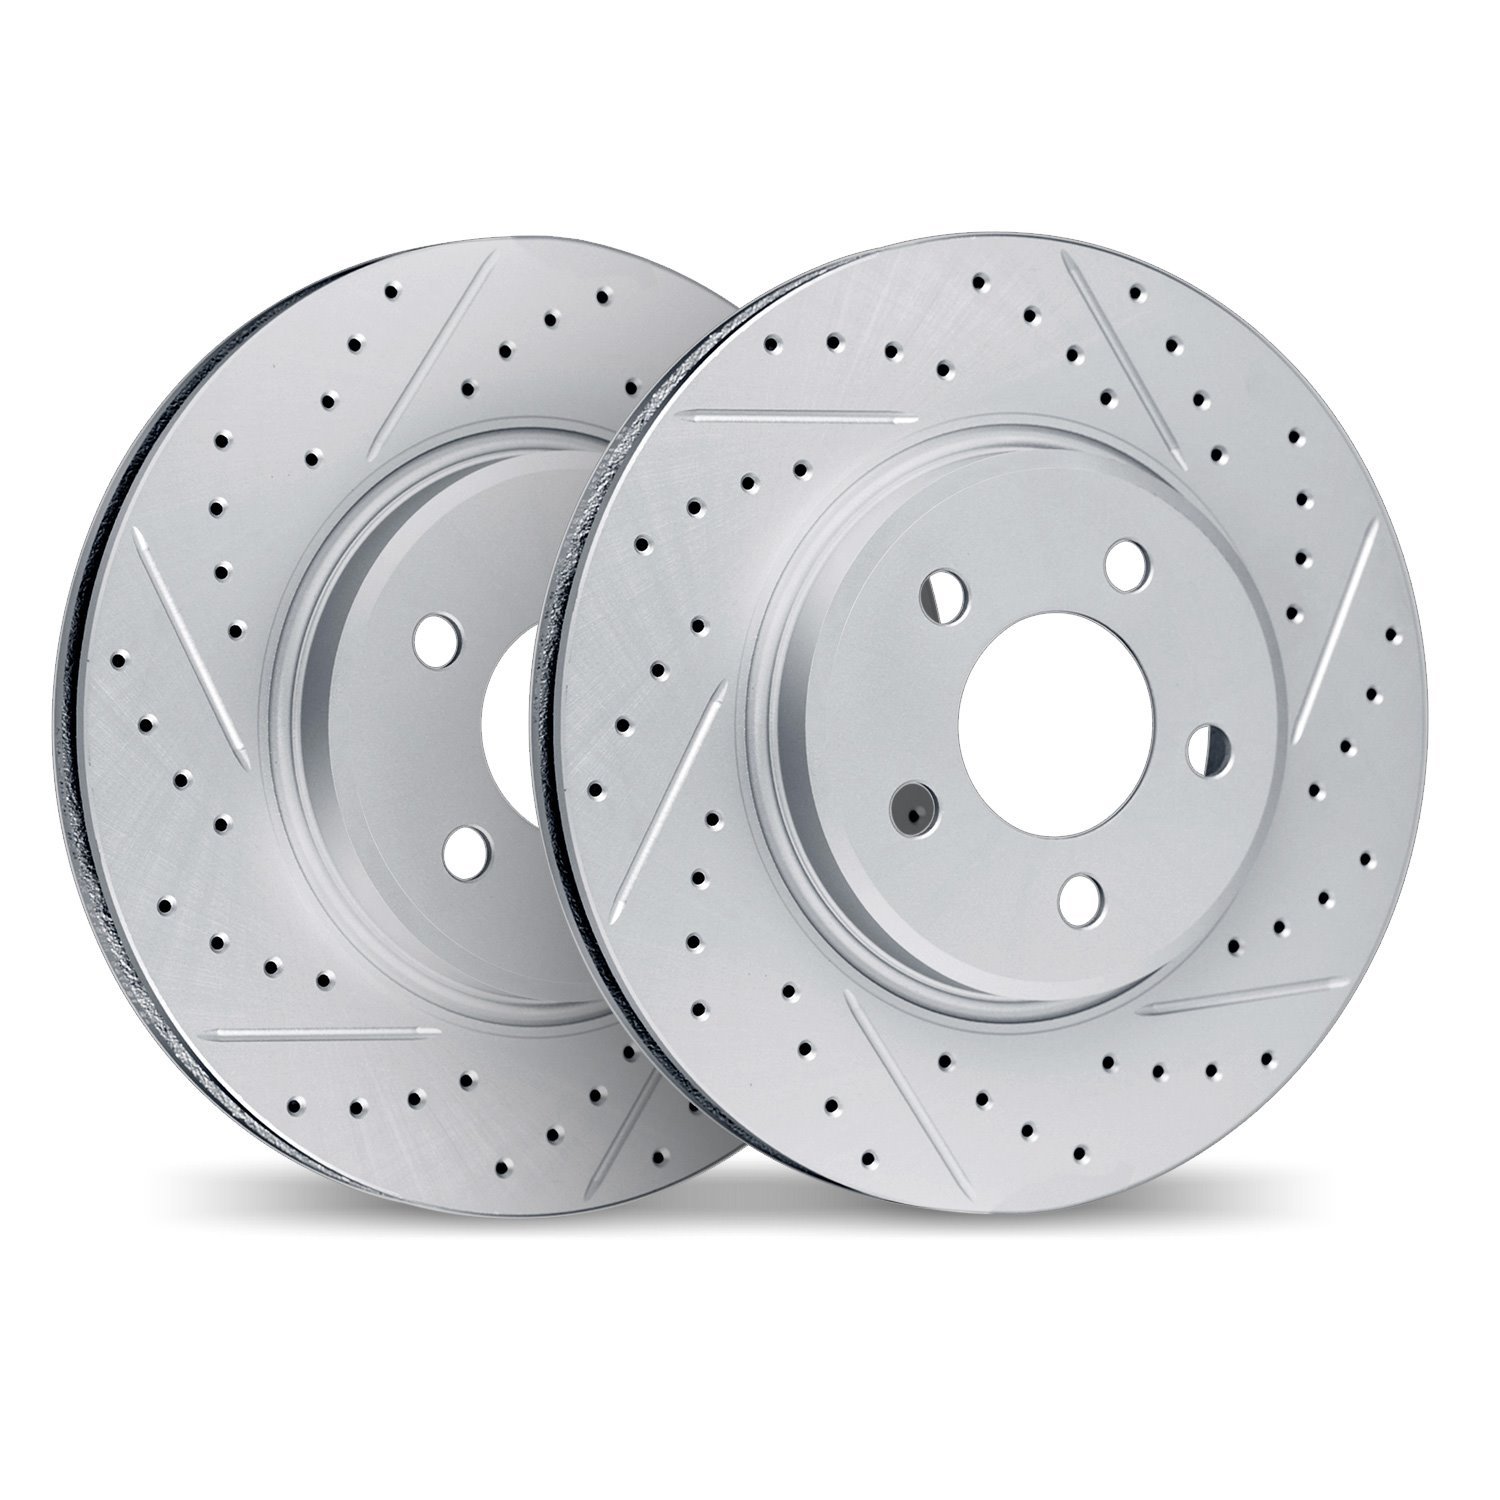 2002-27007 Geoperformance Drilled/Slotted Brake Rotors, 1998-2004 Volvo, Position: Front